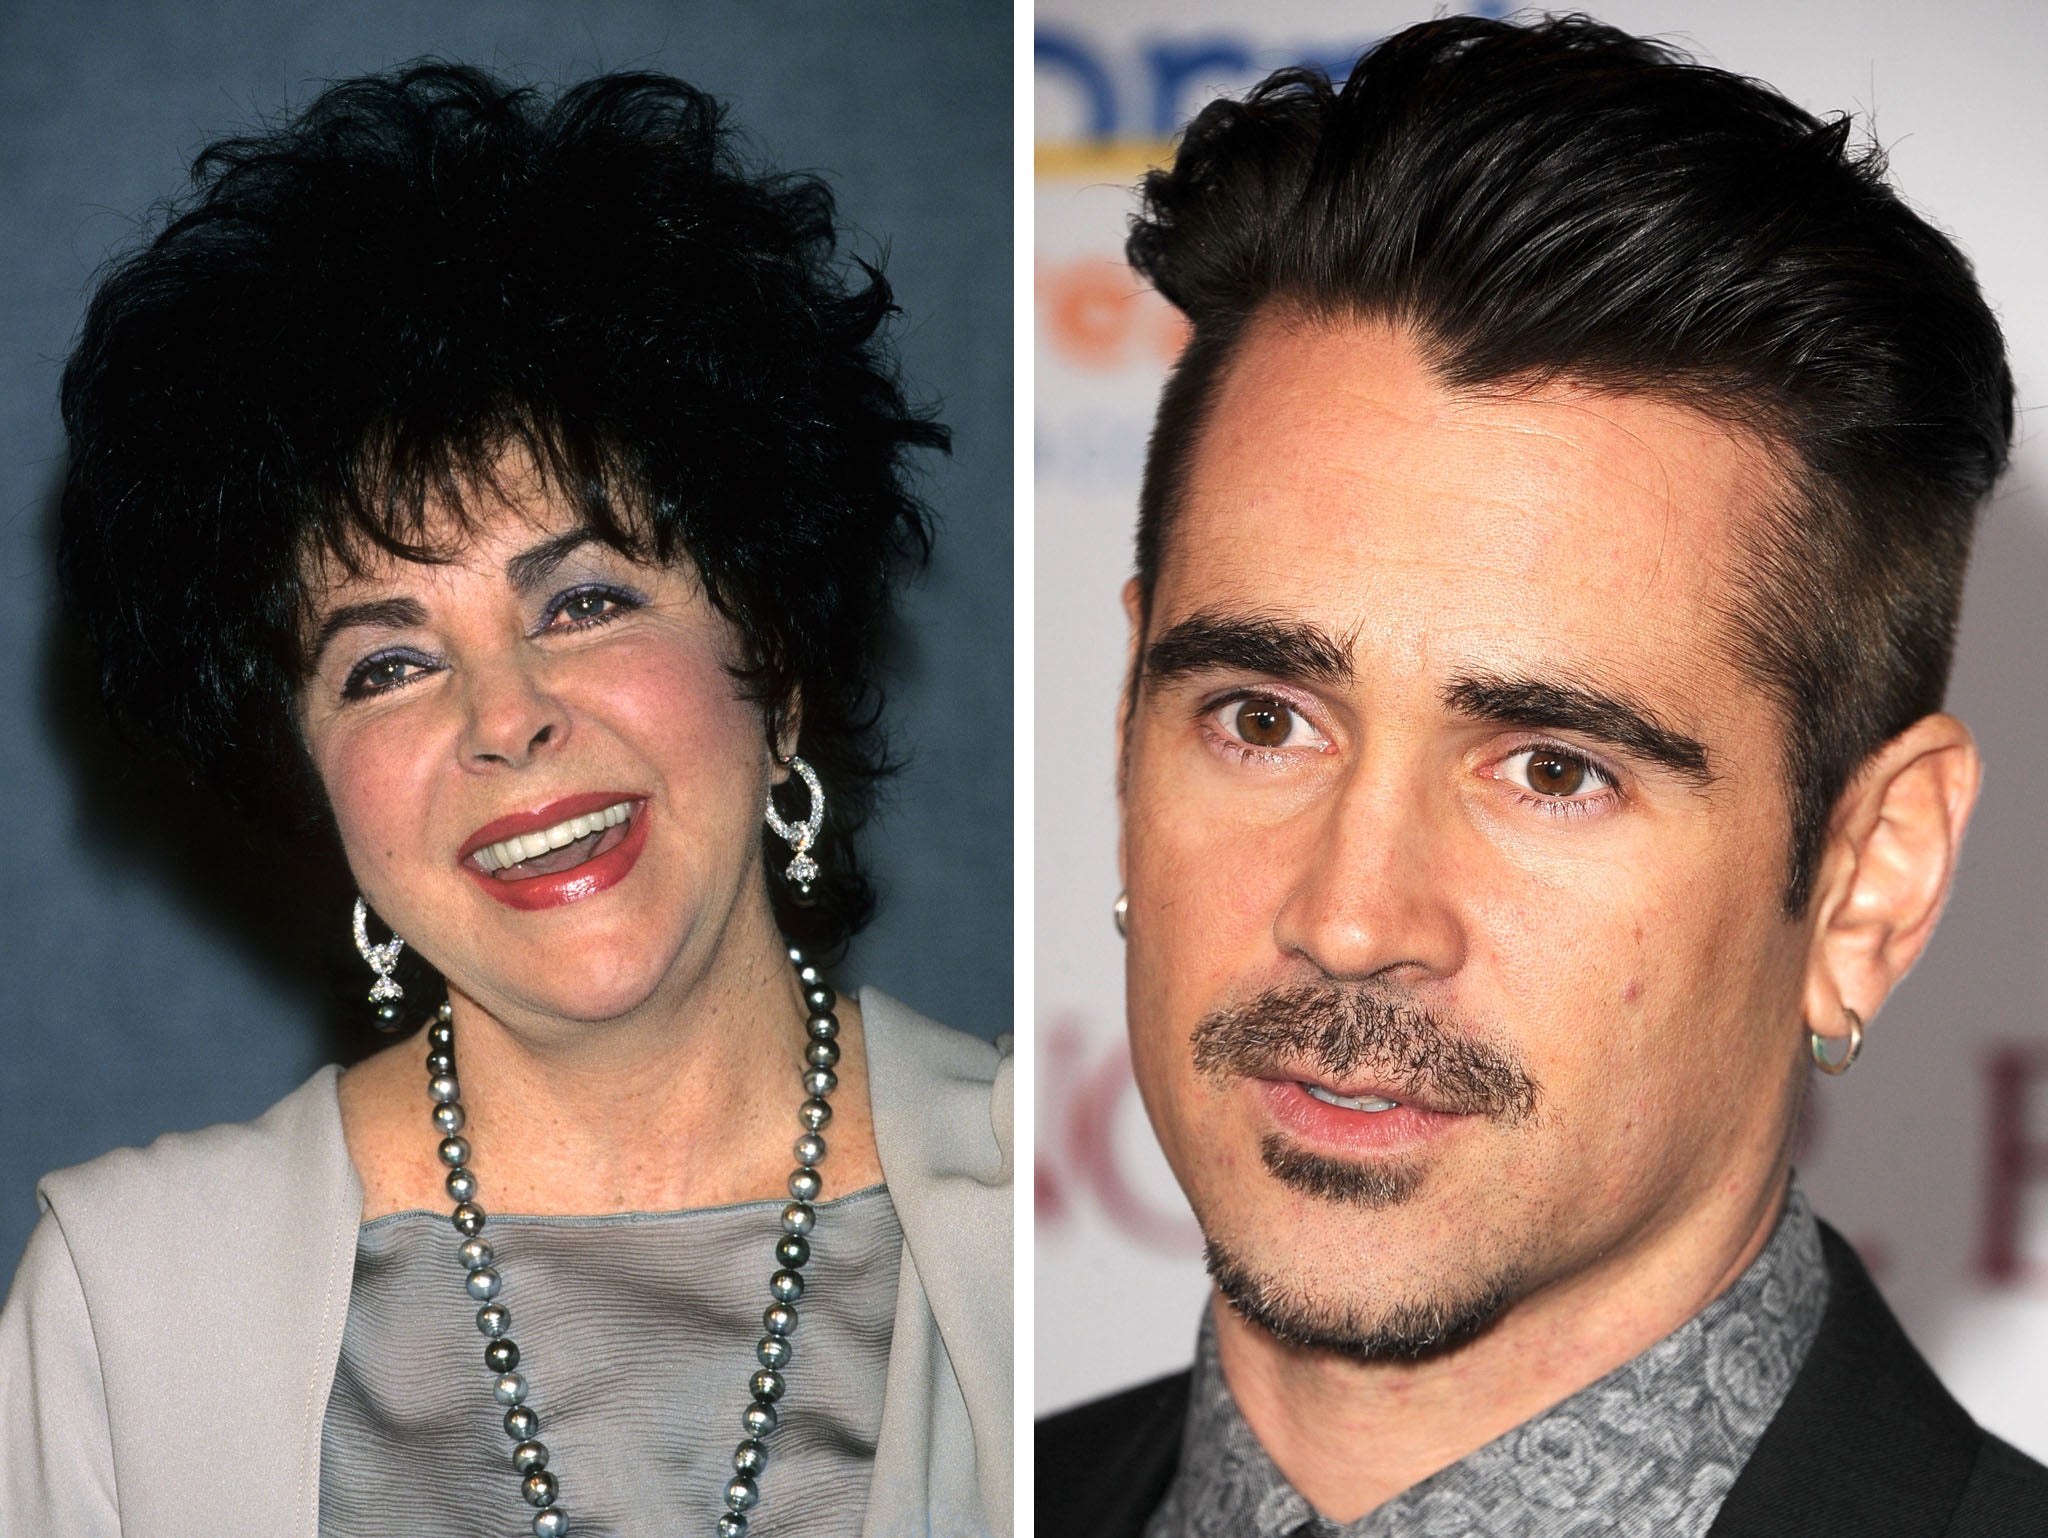 Colin Farrell has revealed that he enjoyed an unusually close relationship late actress Elizabeth Taylor before she passed away in 2011 aged 79.